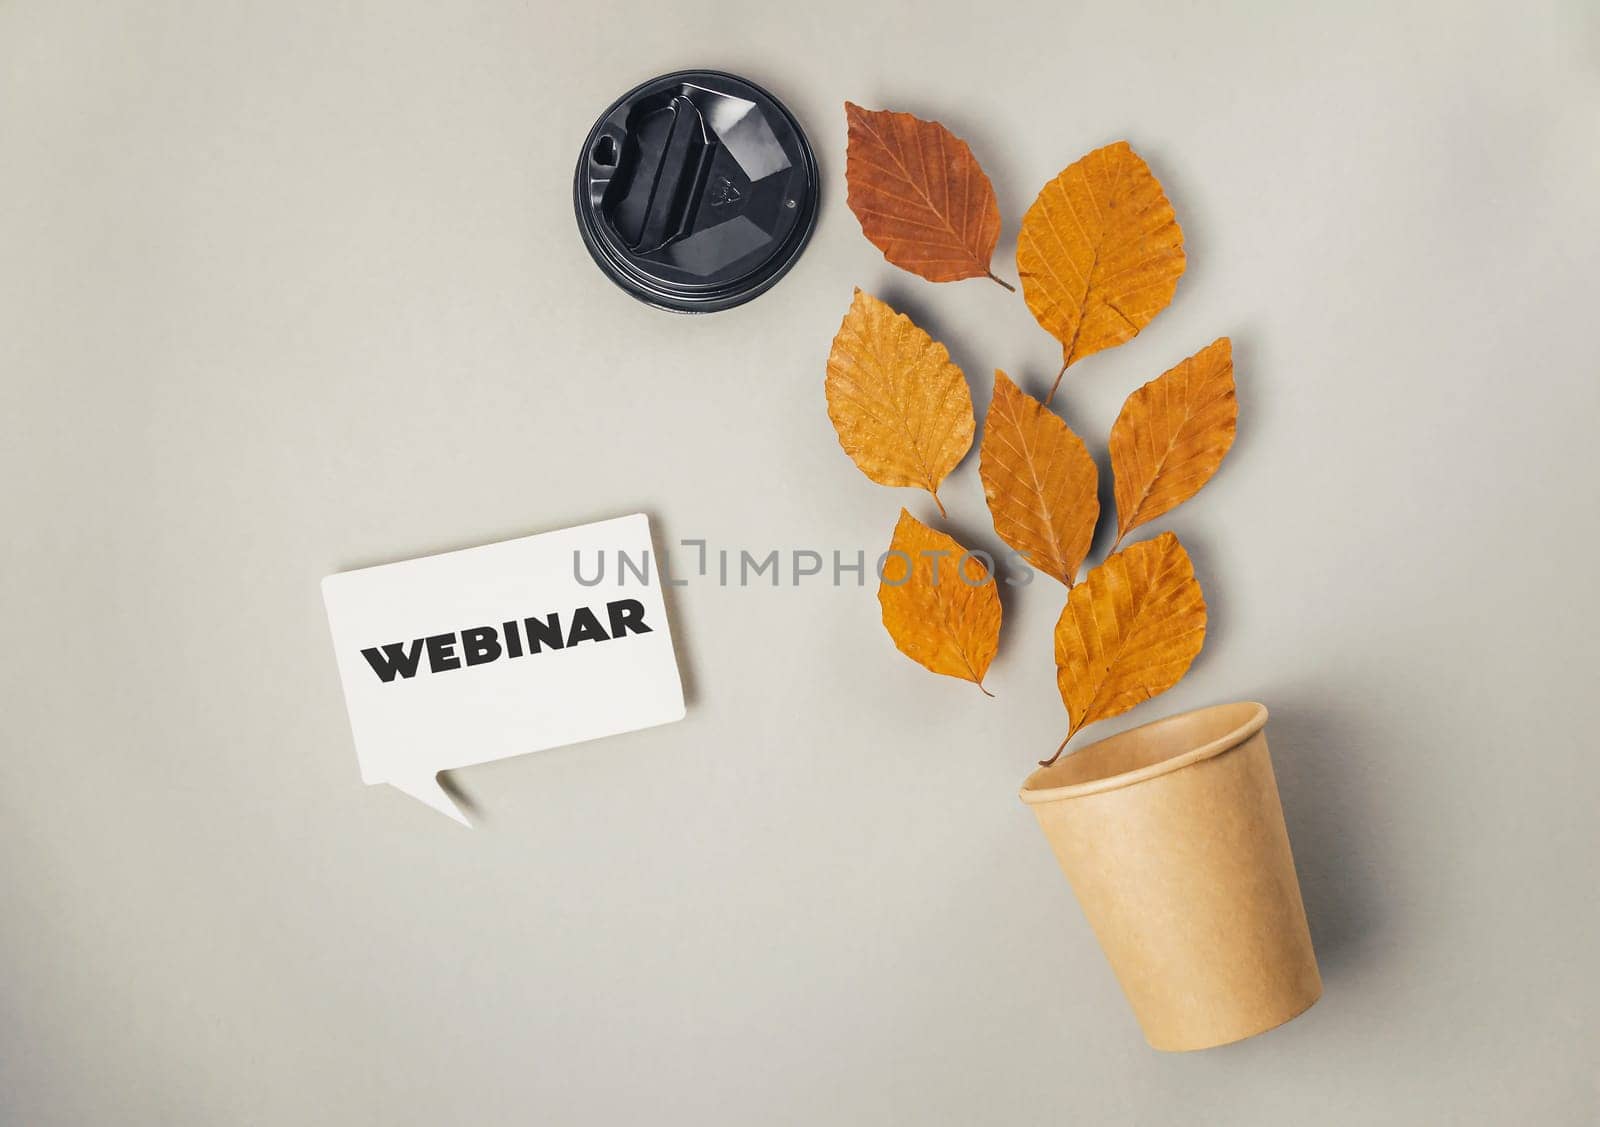 A white sign with the word "webinar" written on it is placed next to a potted plant with leaves